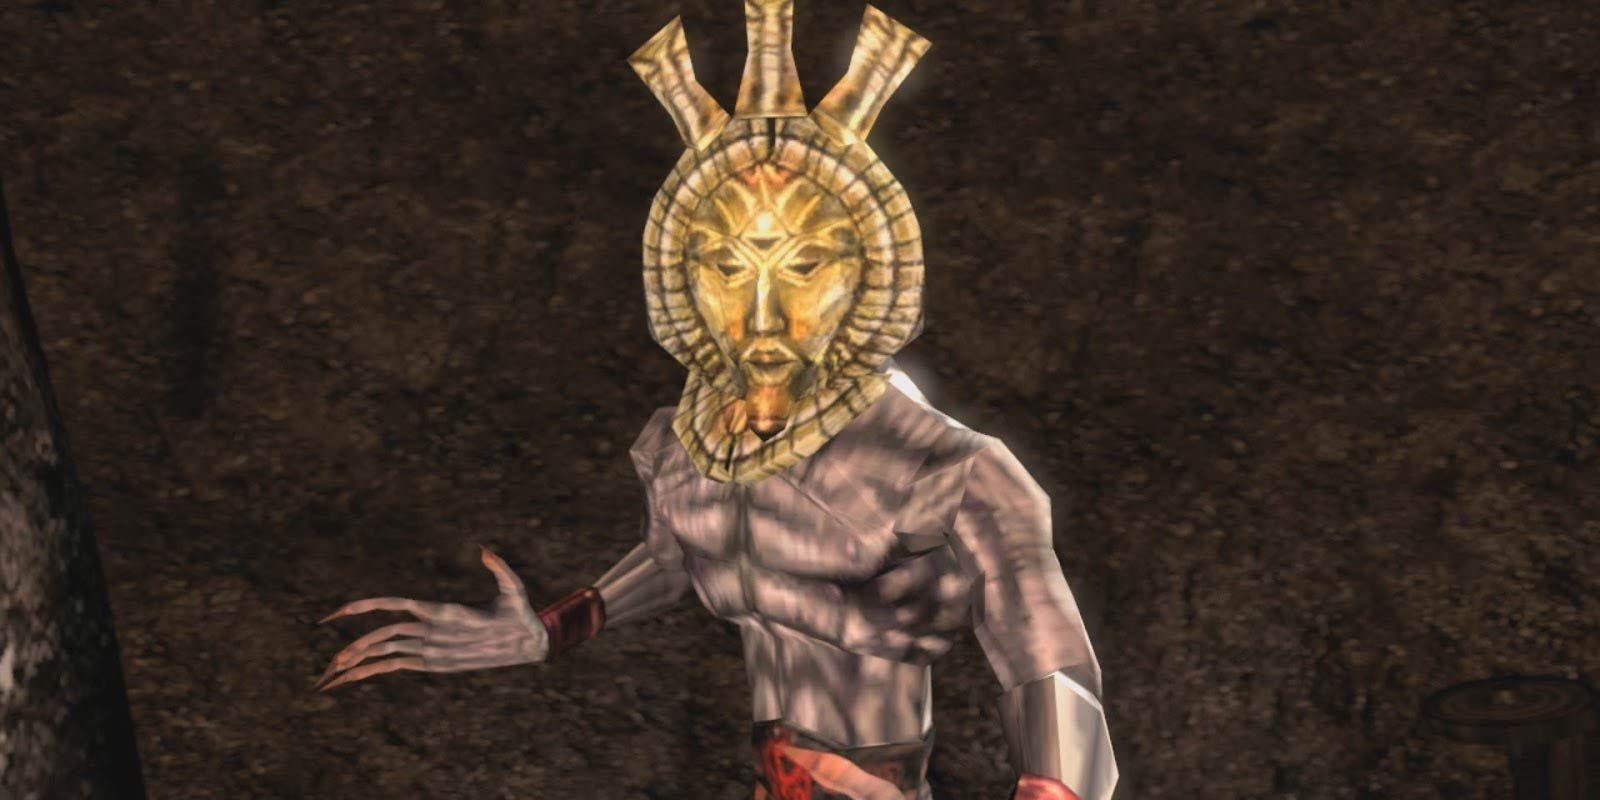 Dagoth Ur from The Elder Scrolls III: Morrowind; a half-naked man with greyish skin and an ornate golden mask.